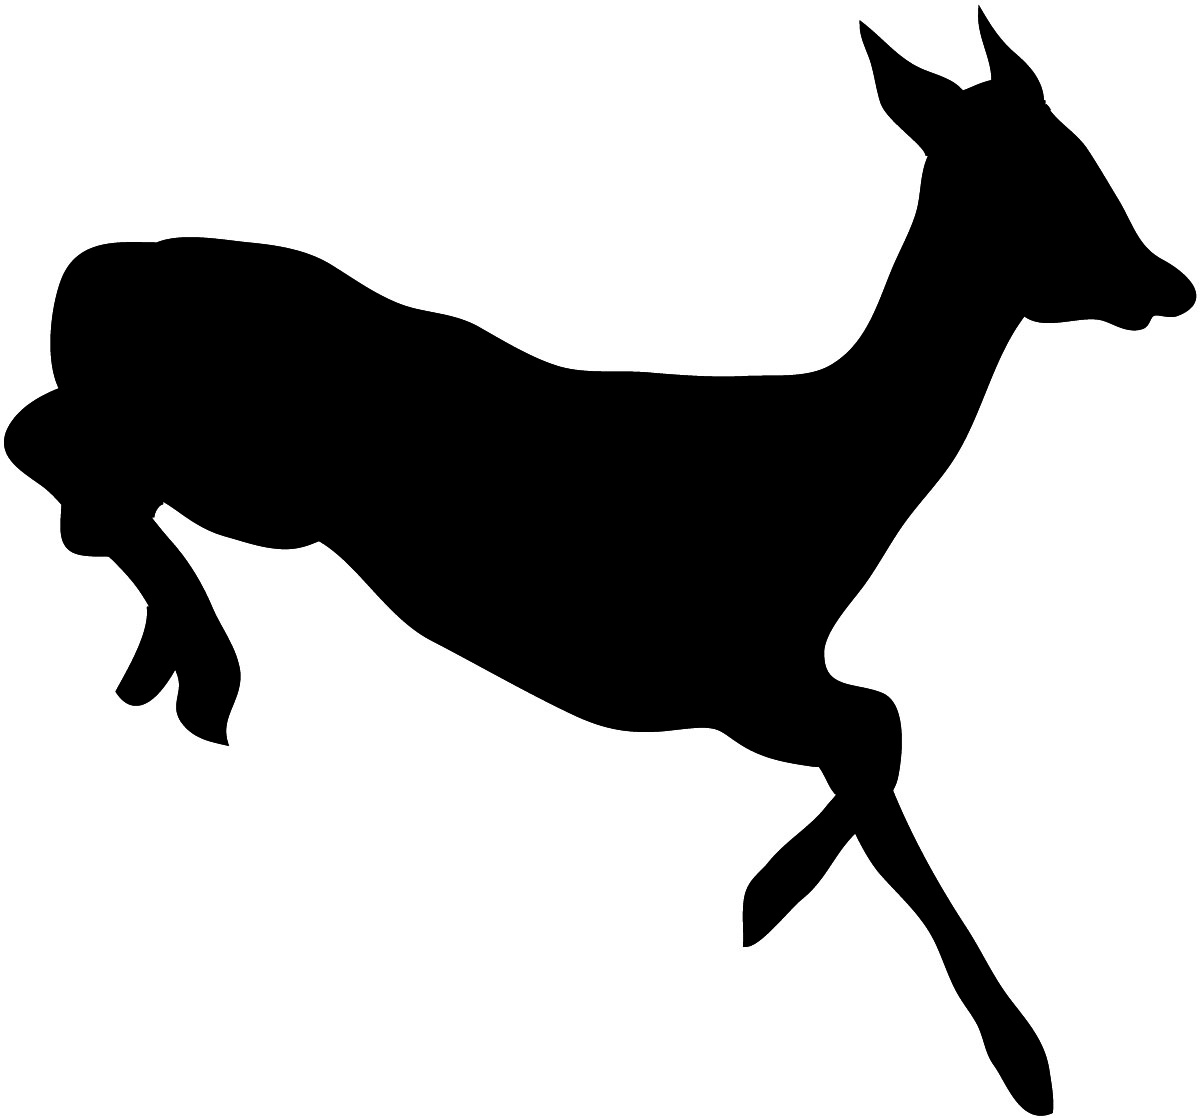 Jumping Stag Silhouette Clip Art - ClipArt Best